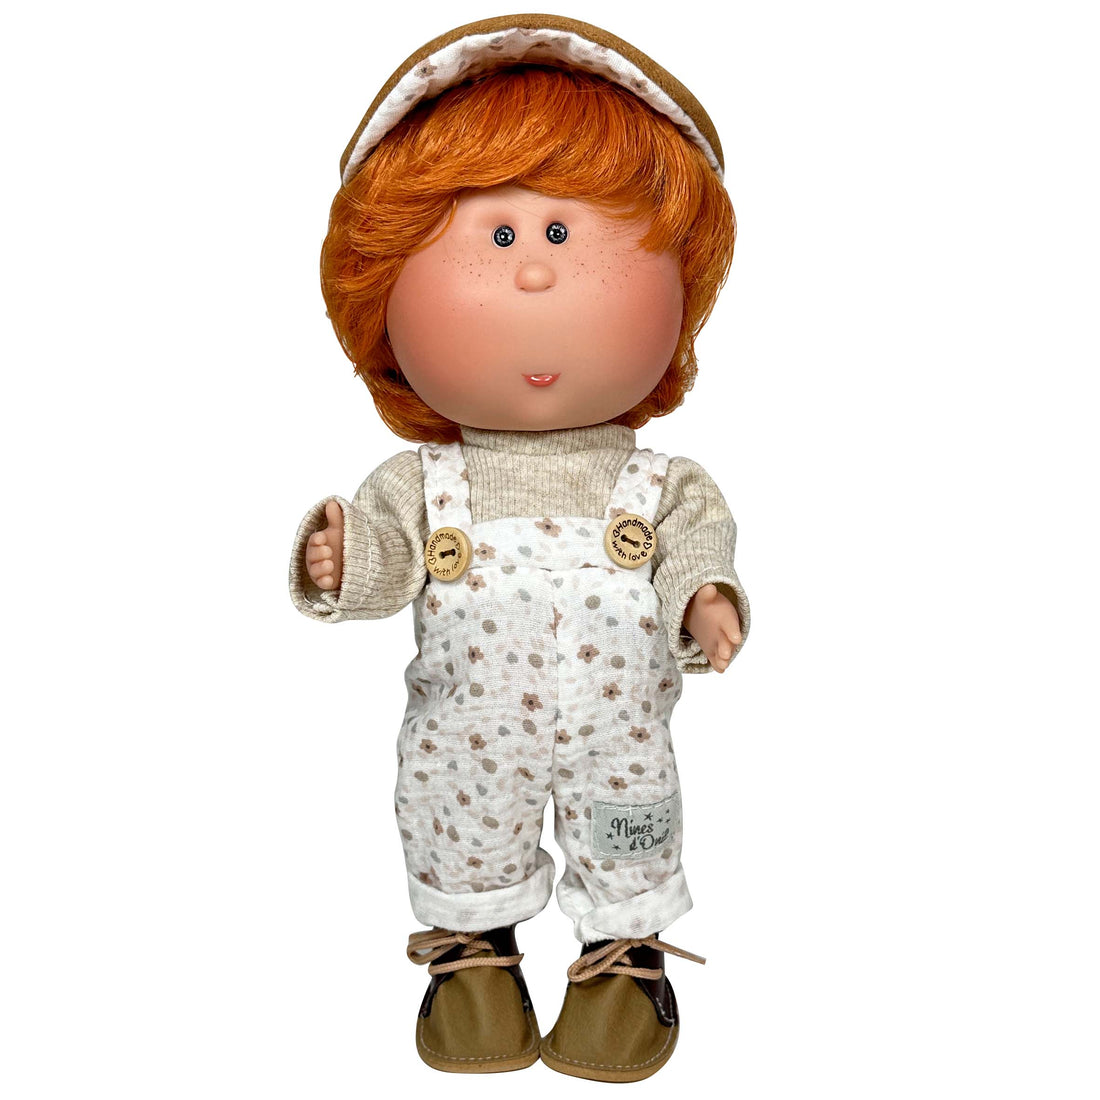 Handcrafted Collectible Mia (Mio) Boy Peep Doll (3401) by Nines D&